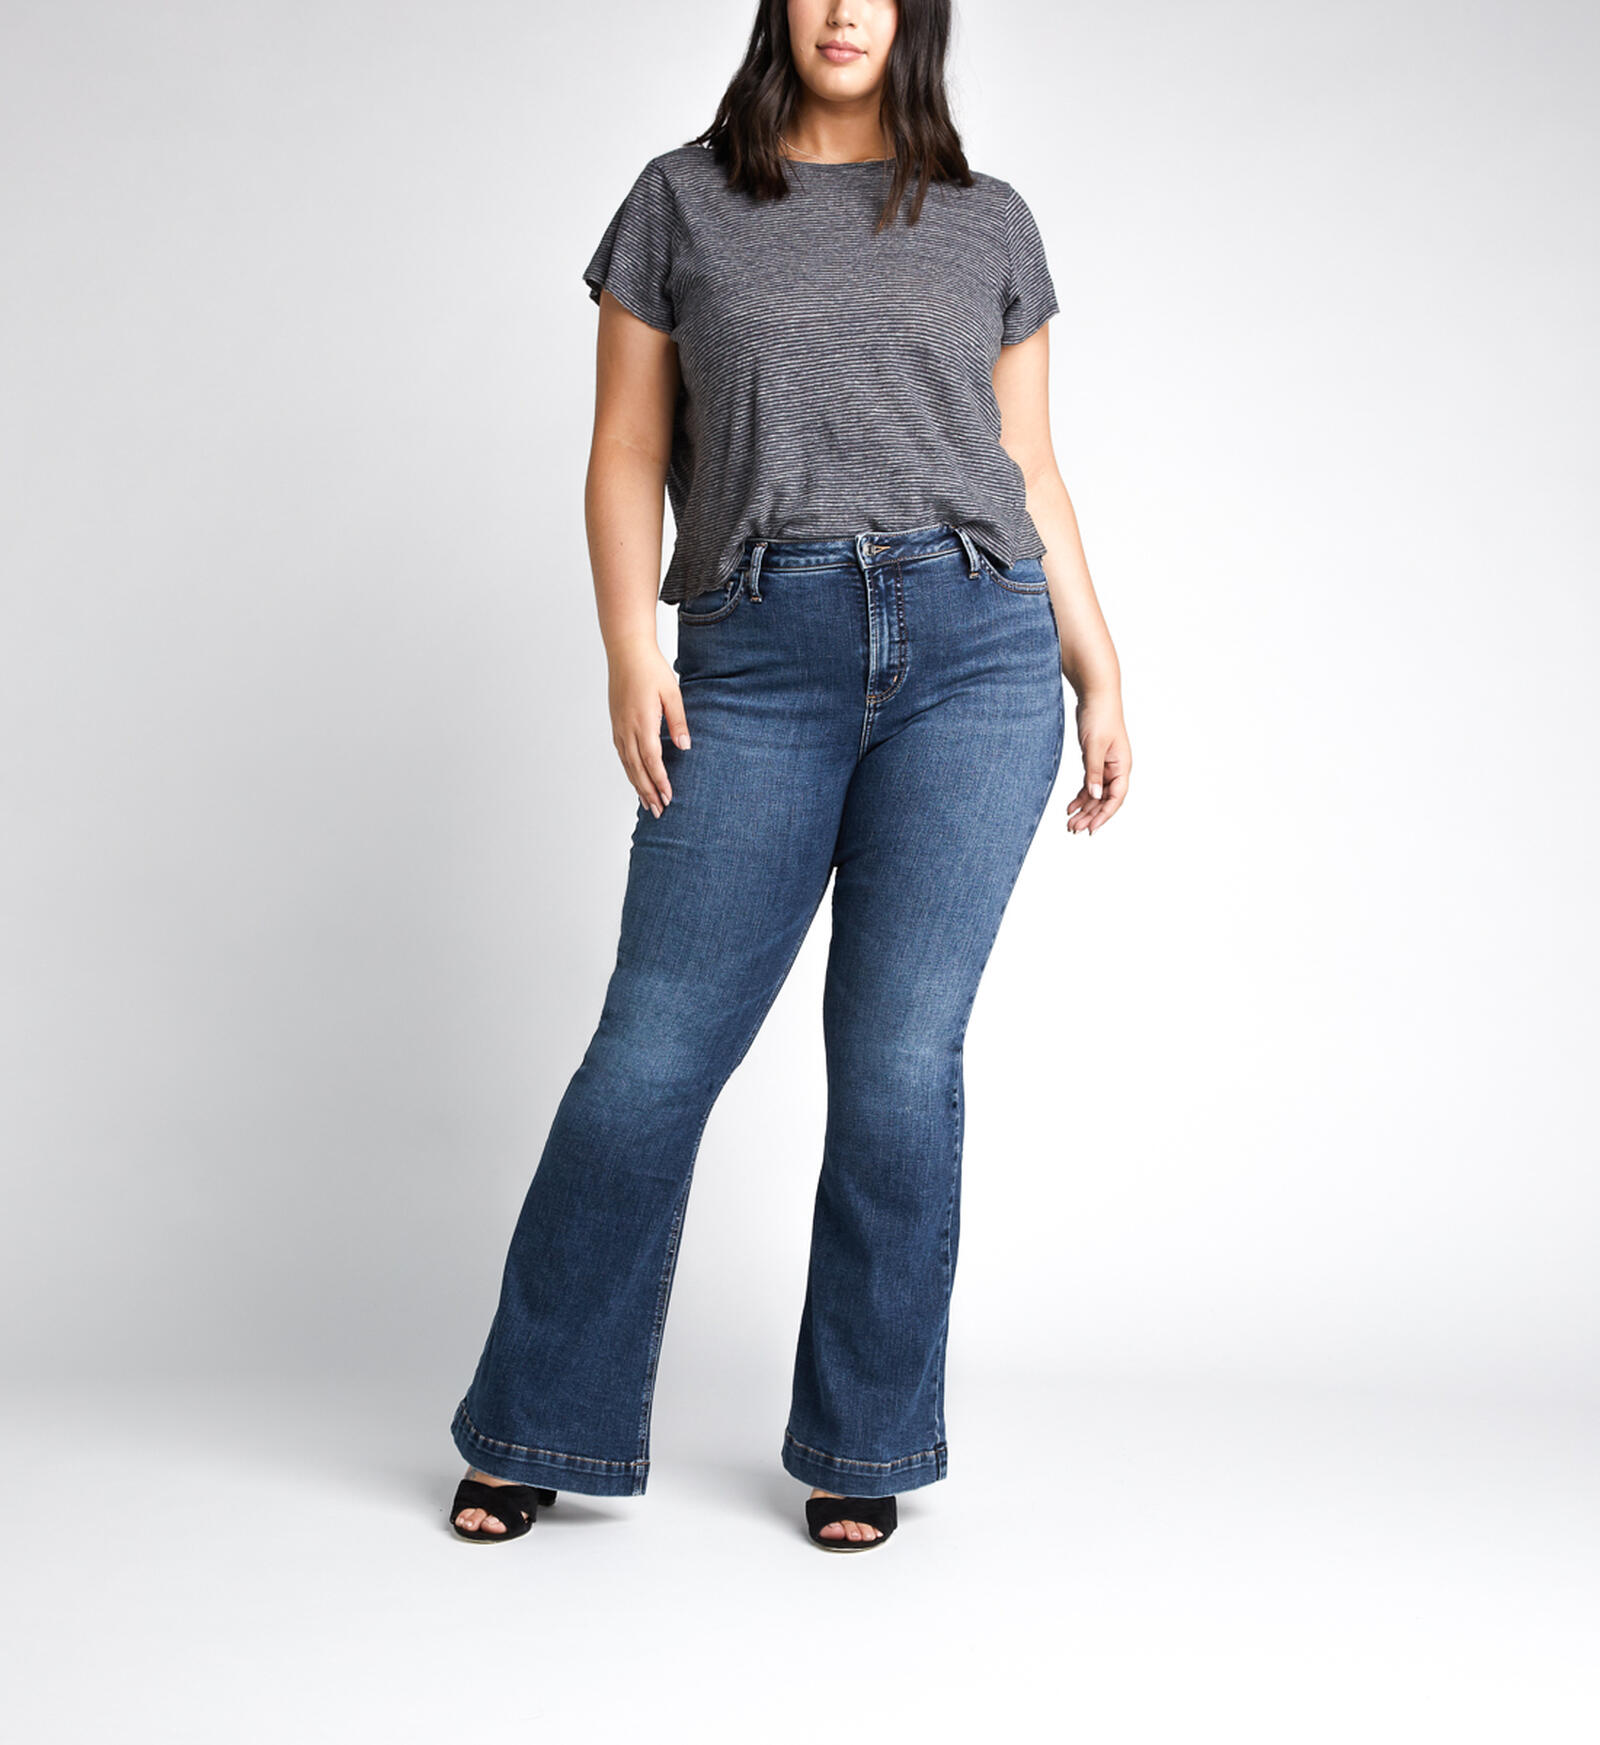 Buy Note High Flare Jeans Plus Size for USD 69.00 Silver Jeans US New